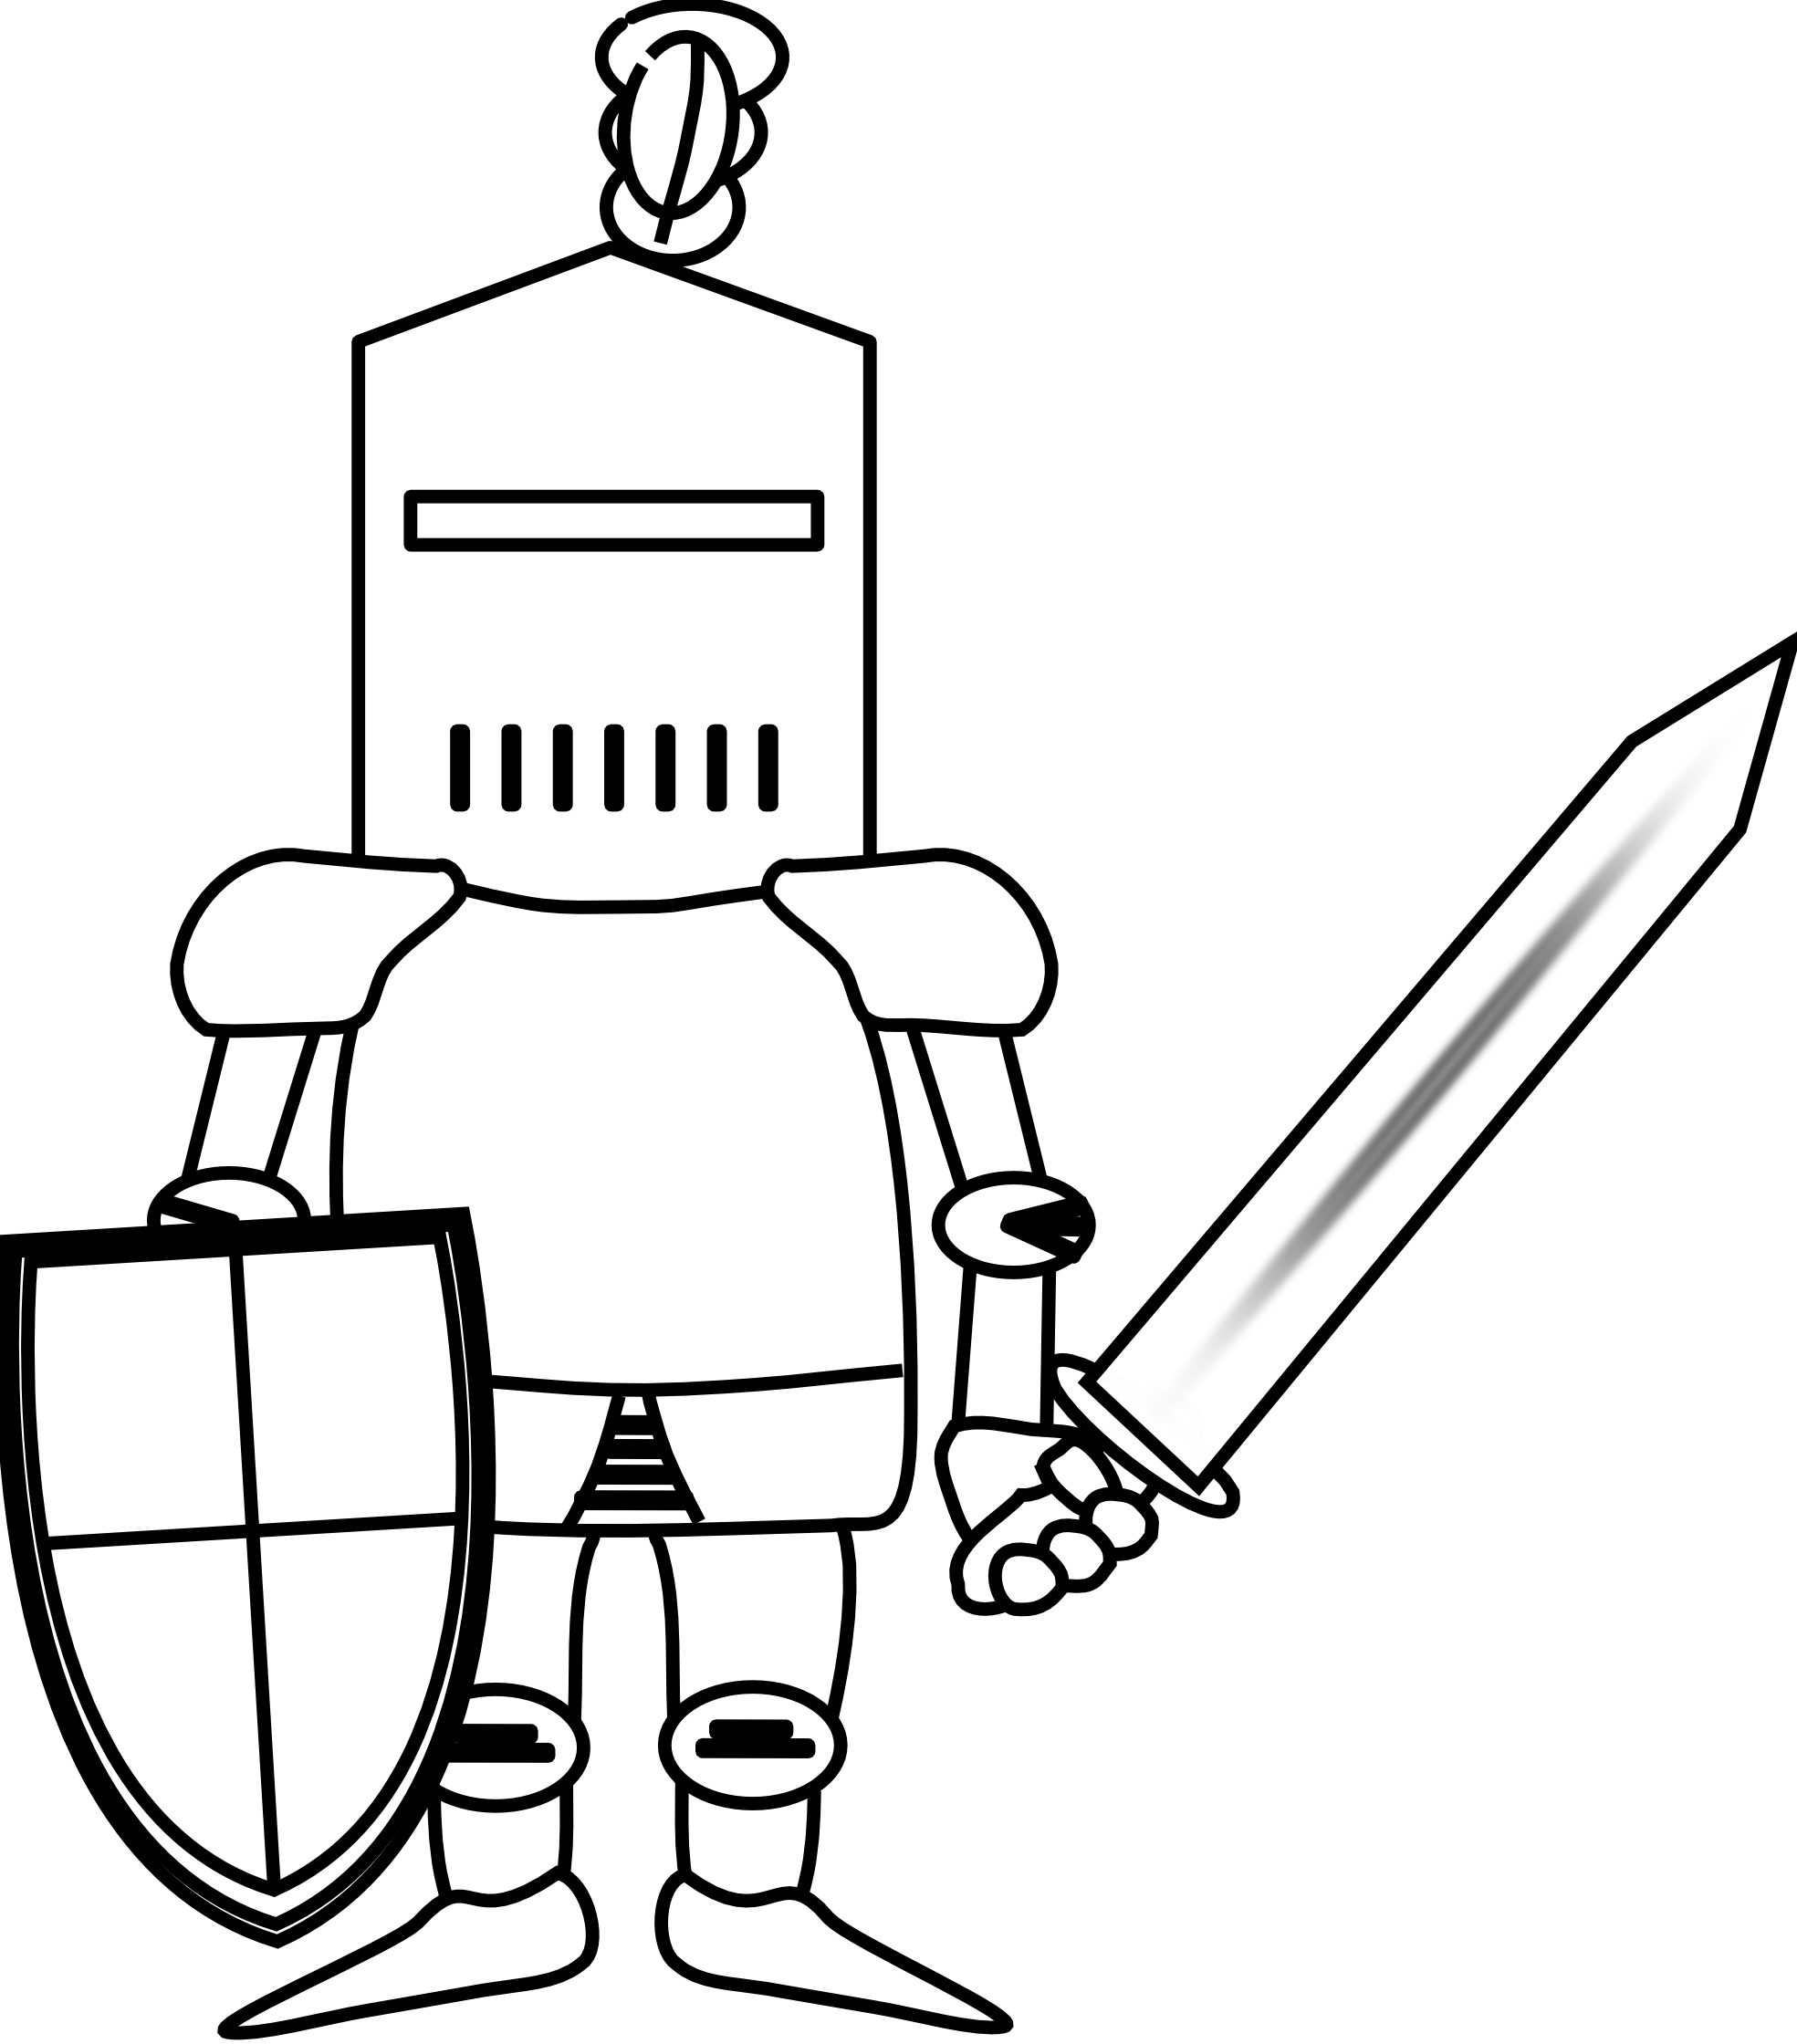 Knight Clipart - ClipArt Best